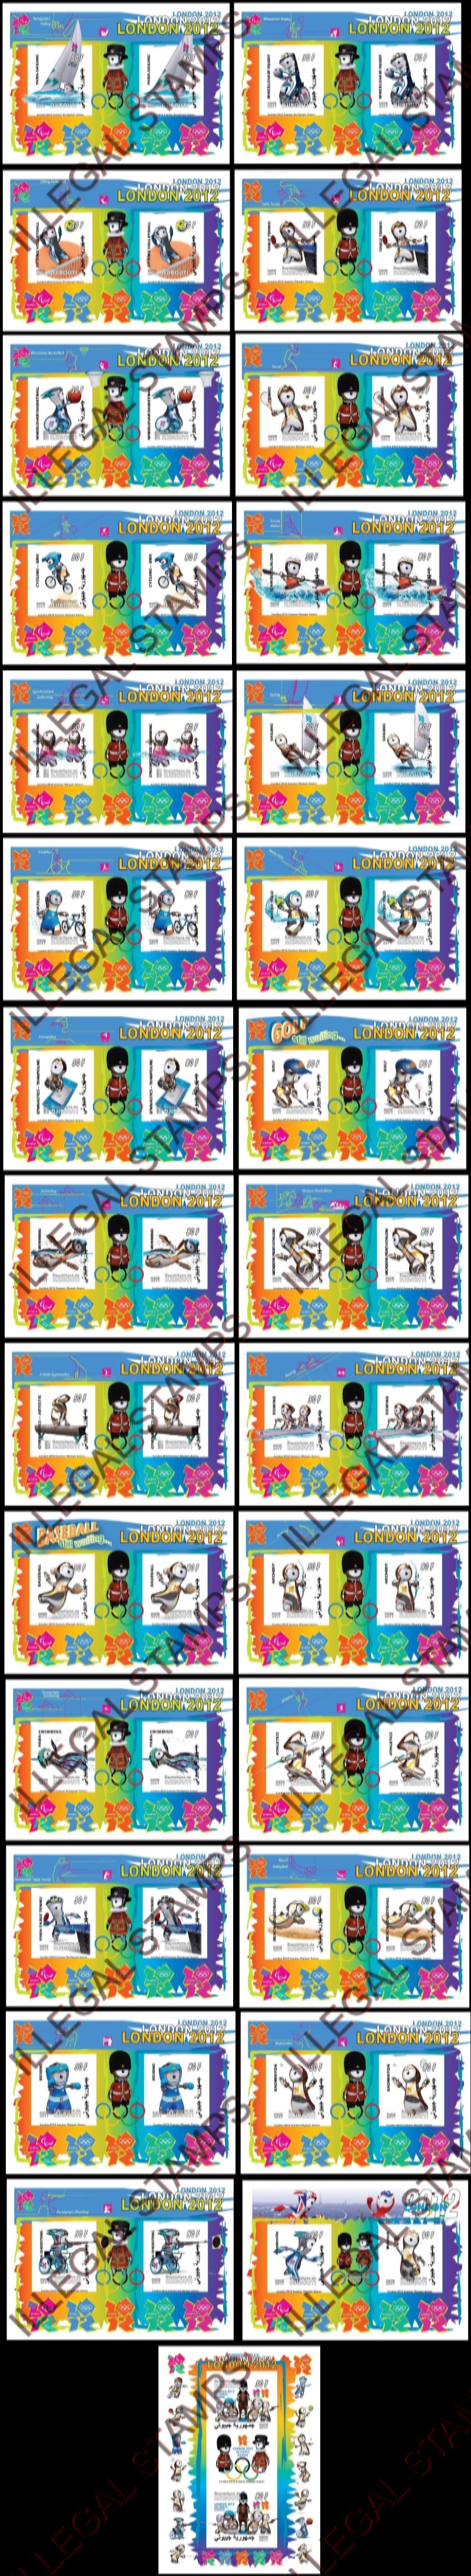 Djibouti 2011 London Paralympic Games Illegal Stamp Souvenir Sheets of 2 Part 2